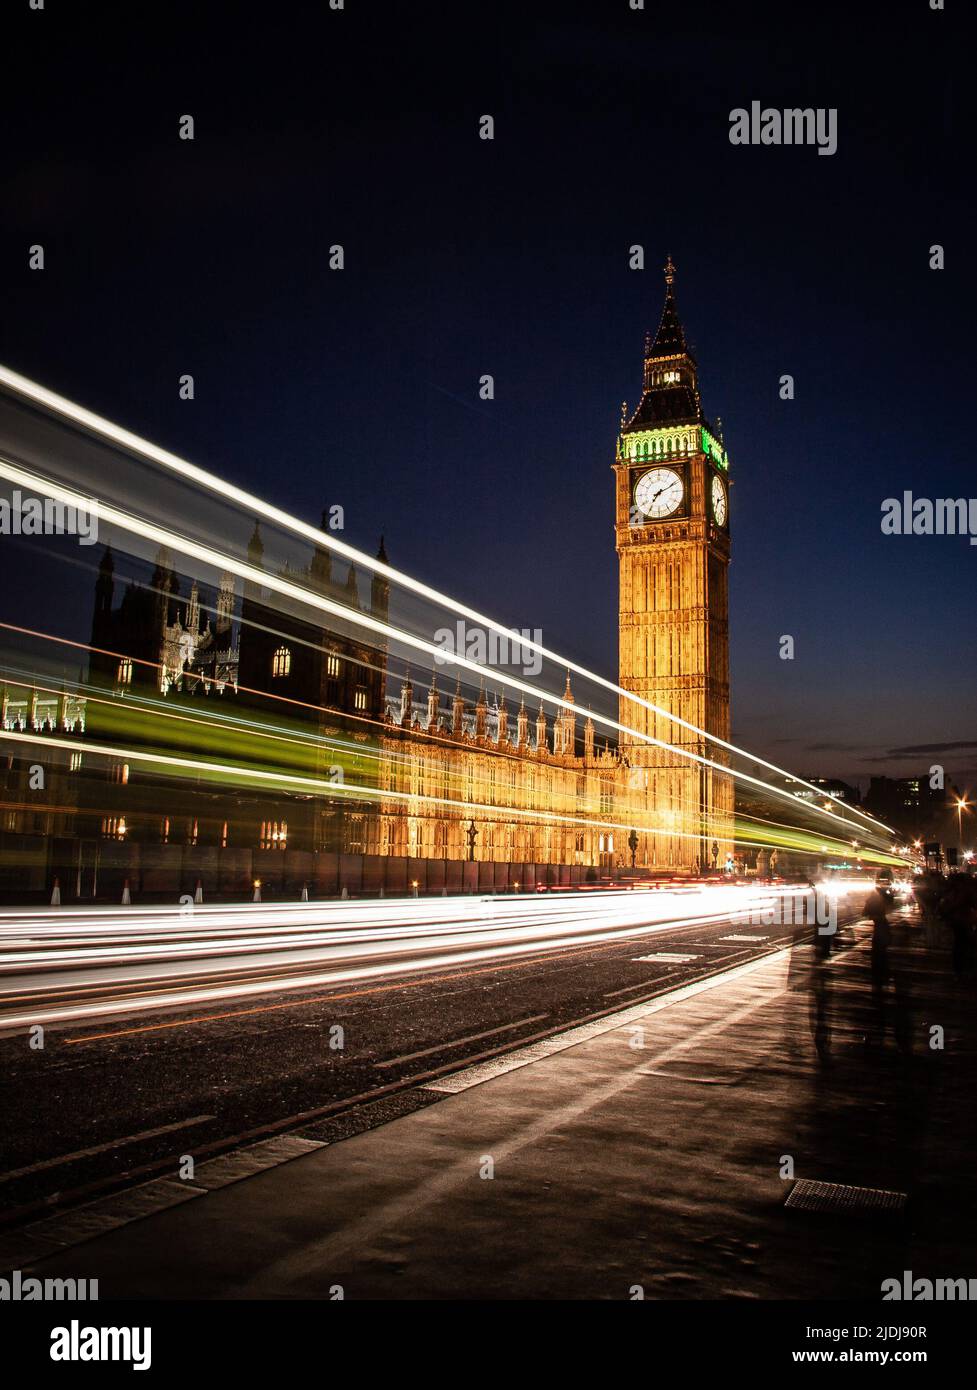 Big Ben at night, London. Long exposure traffic streaming by the famous Big Ben and Houses of Parliament landmarks. Stock Photo